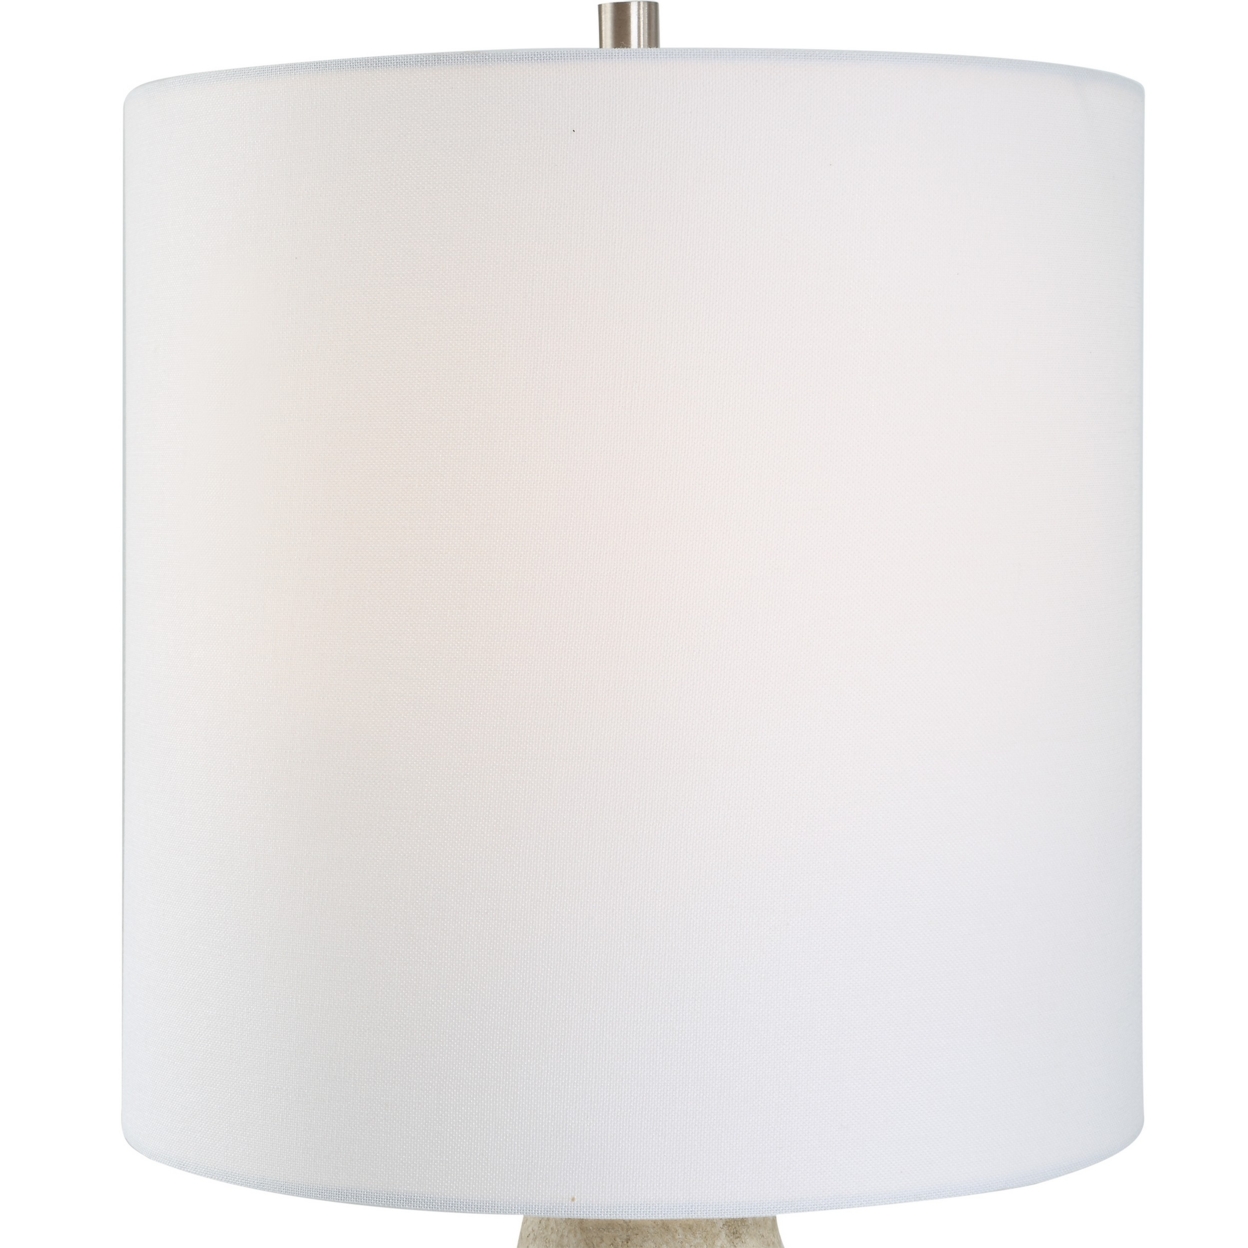 24 Inch Naturally Crafted Table Lamp, Porcelain Ceramic, Classic, White- Saltoro Sherpi